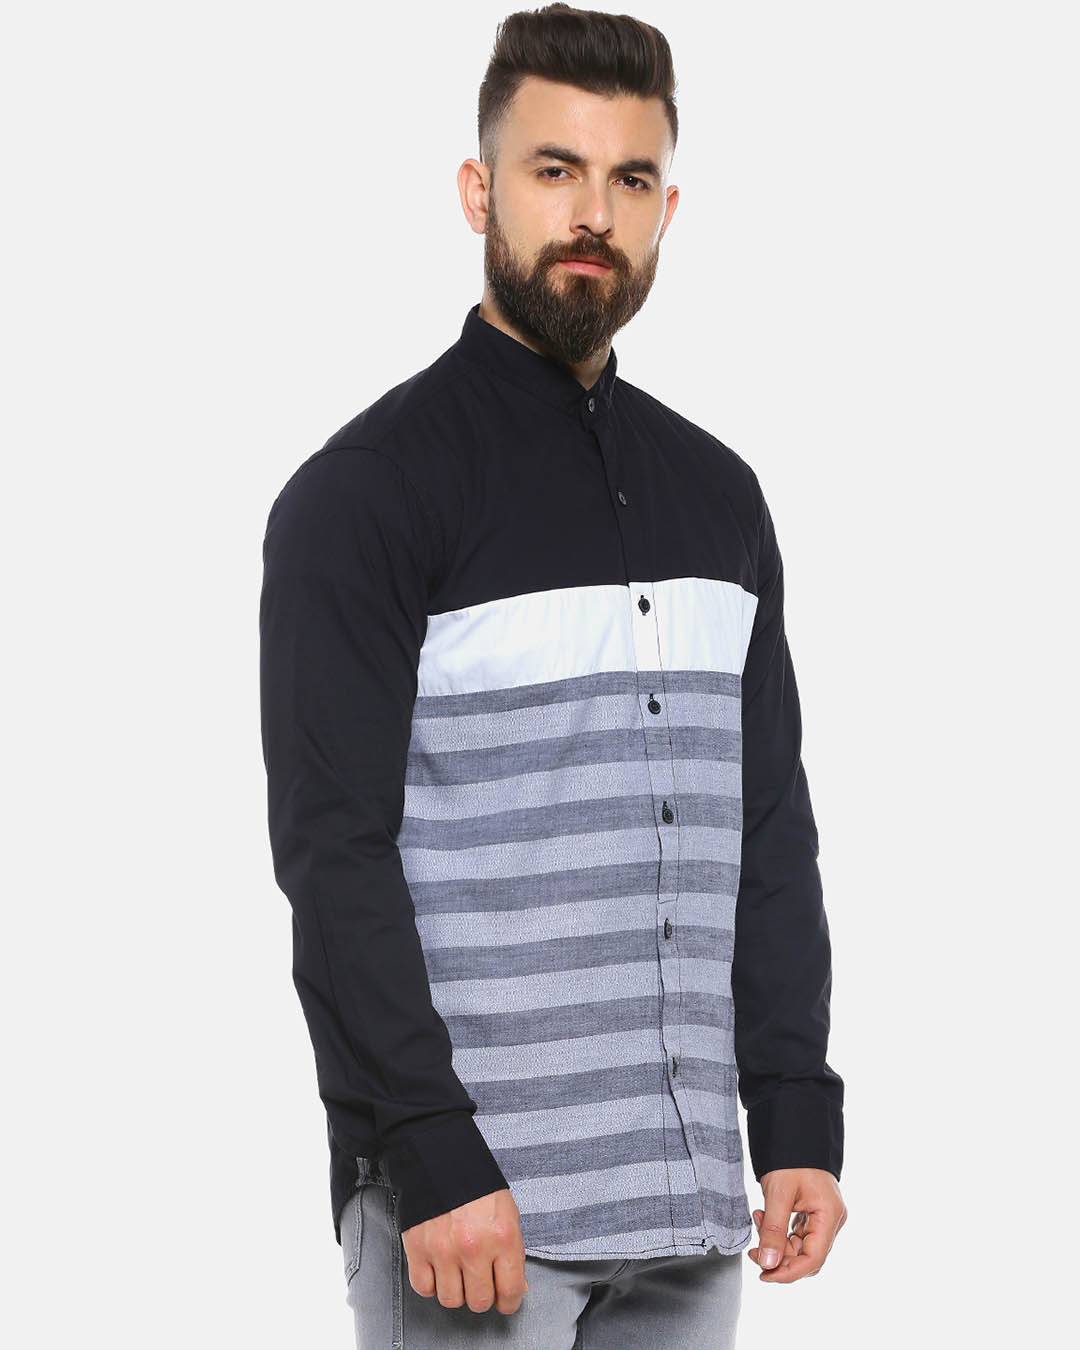 Shop Men Striped Stylish New Trends Casual Spread Shirt-Back